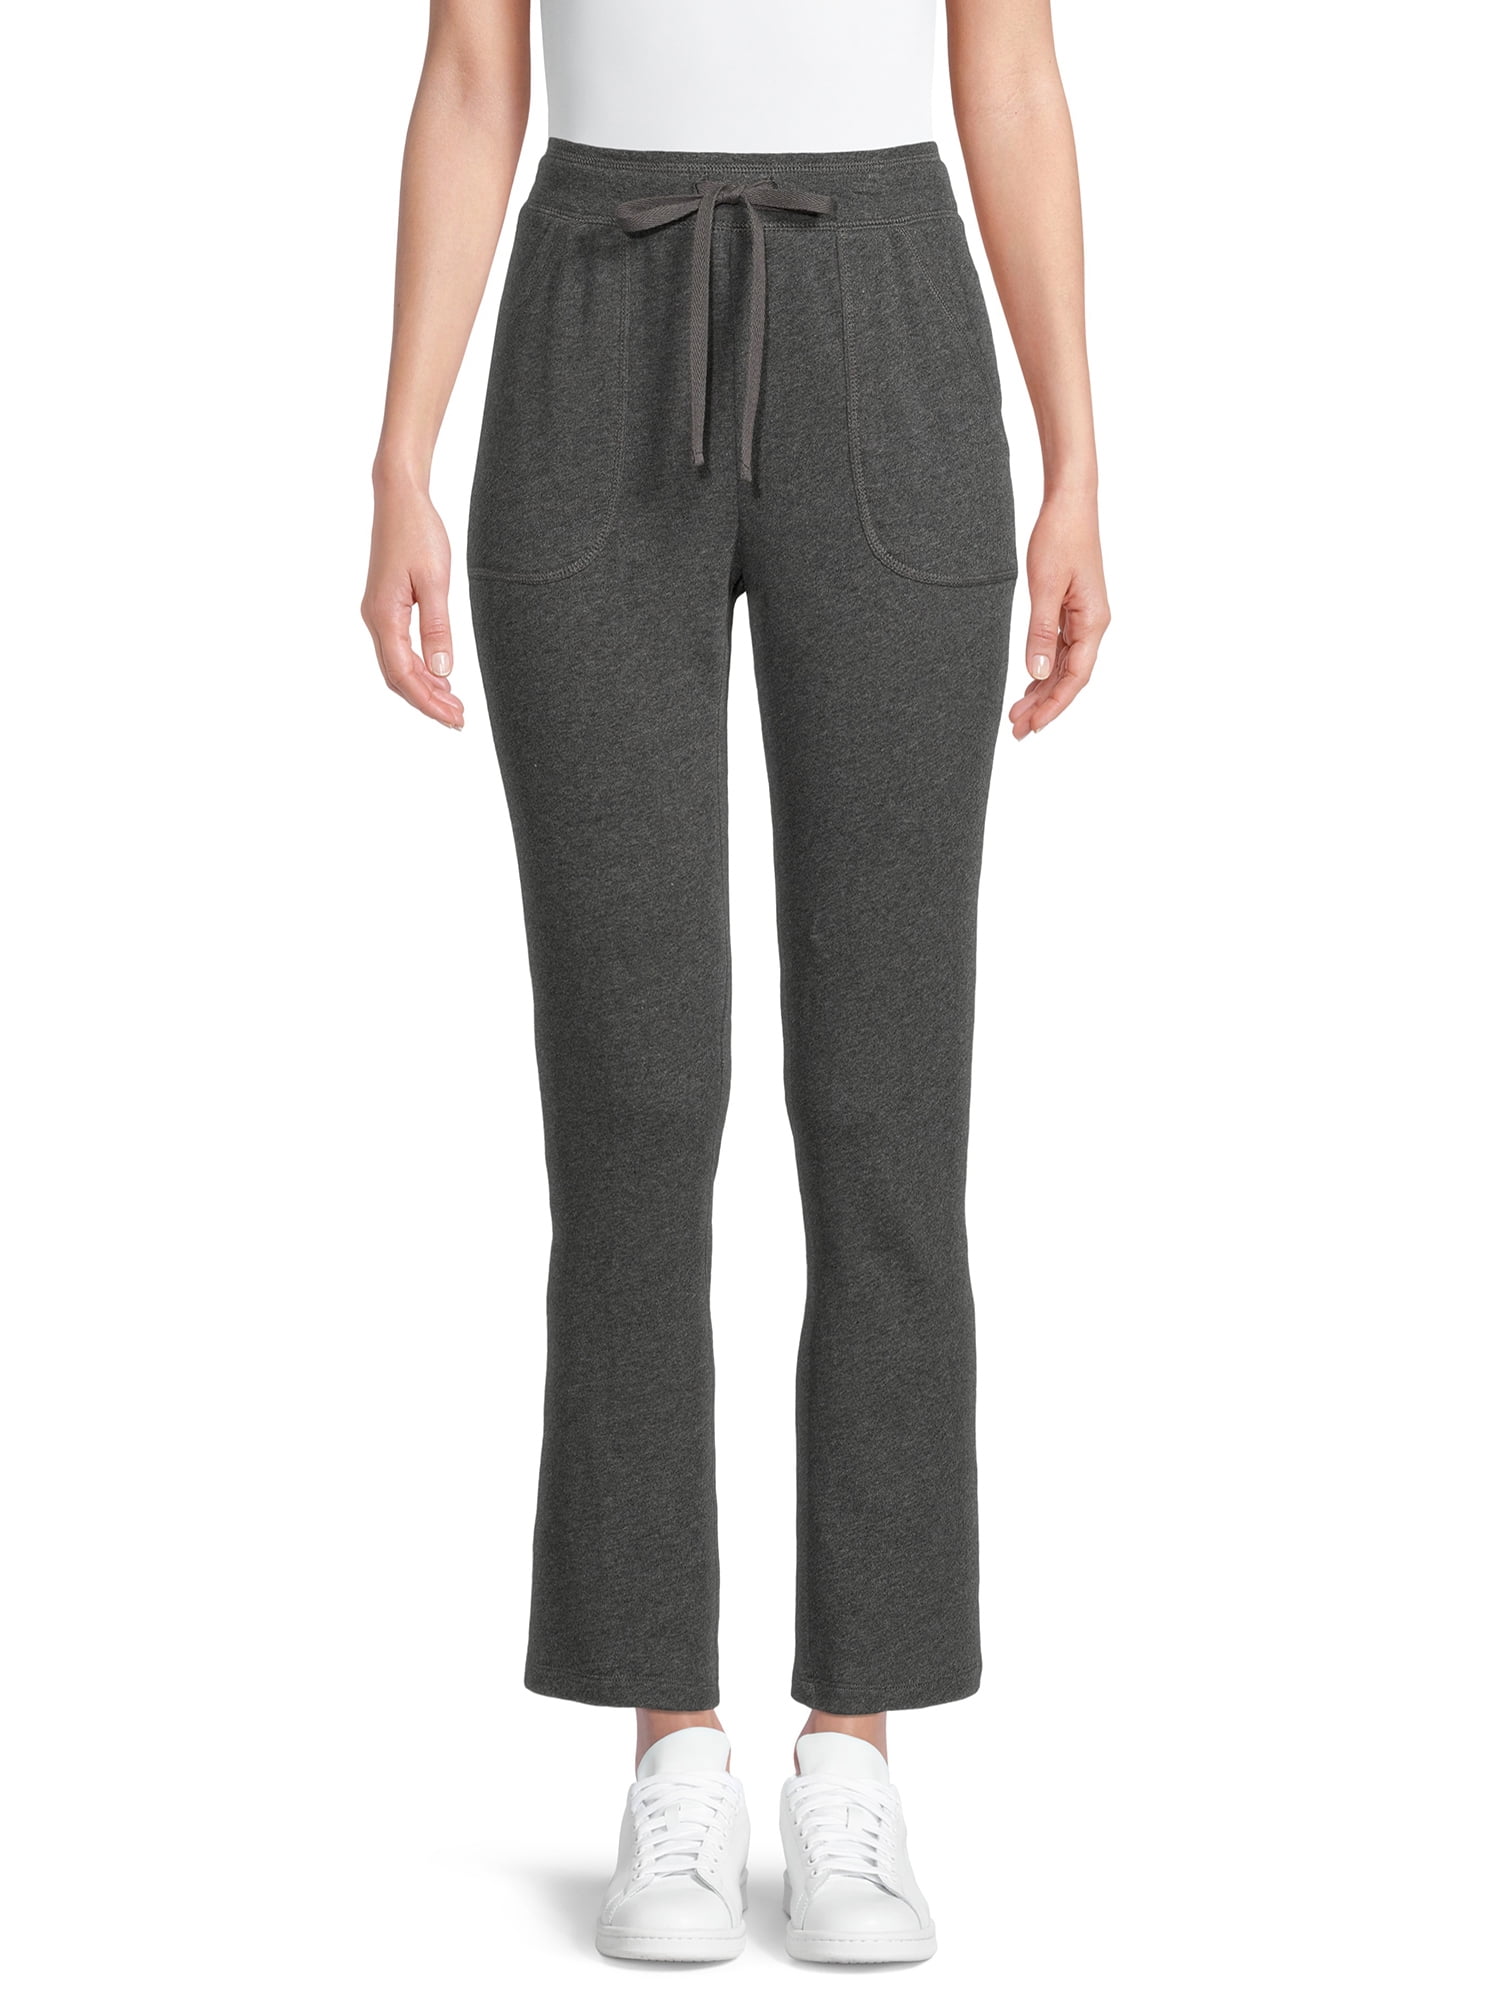 RealSize Women's French Terry Cloth Pants with Pockets 